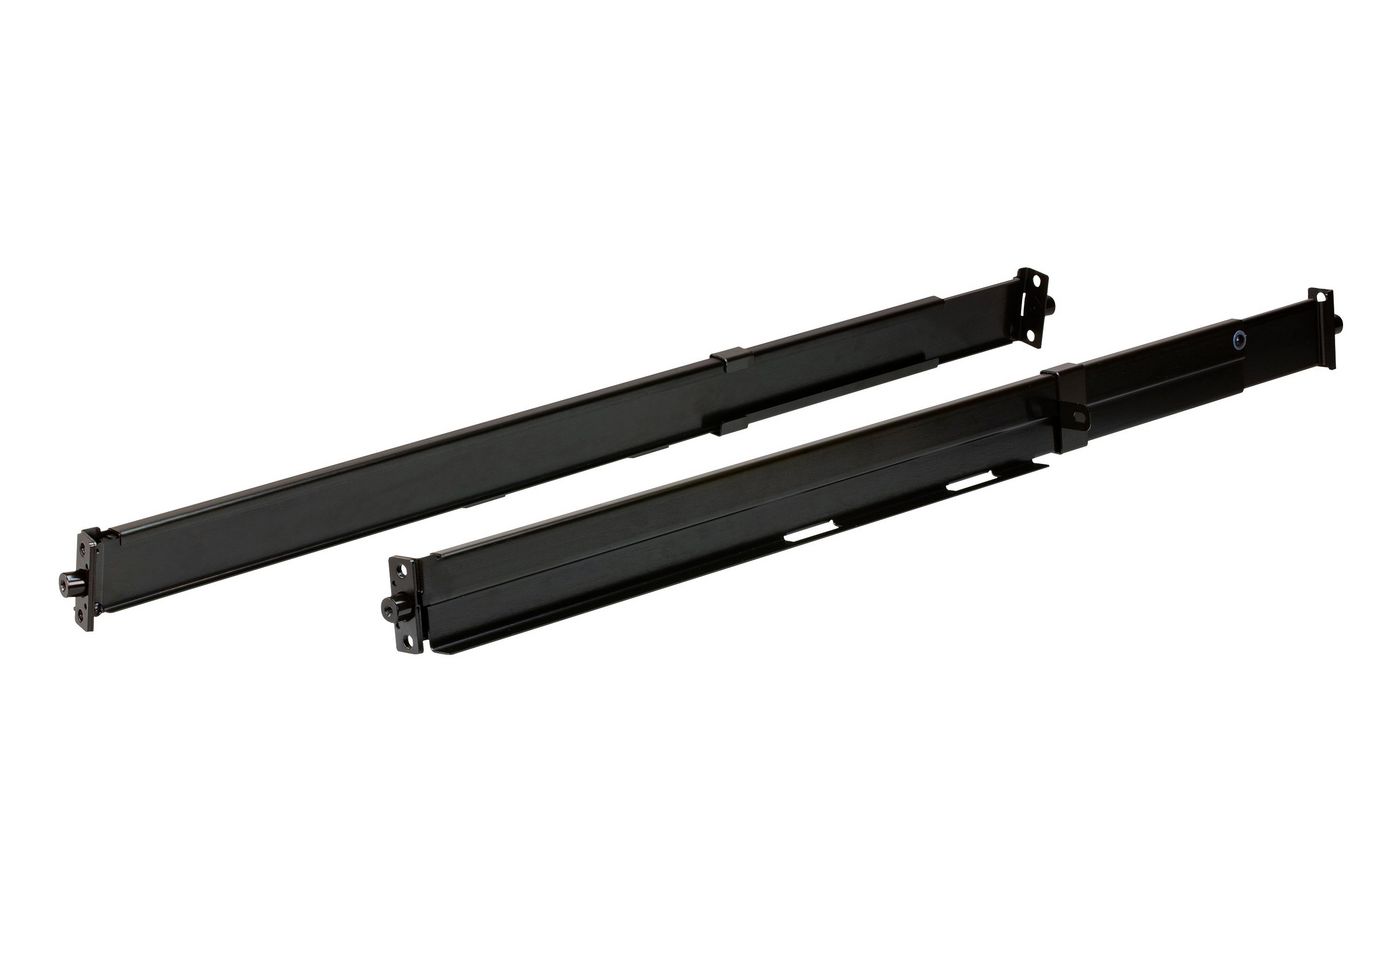 ATEN Rack Mount Kits for LCD Console & KVM Easy Install 2in1